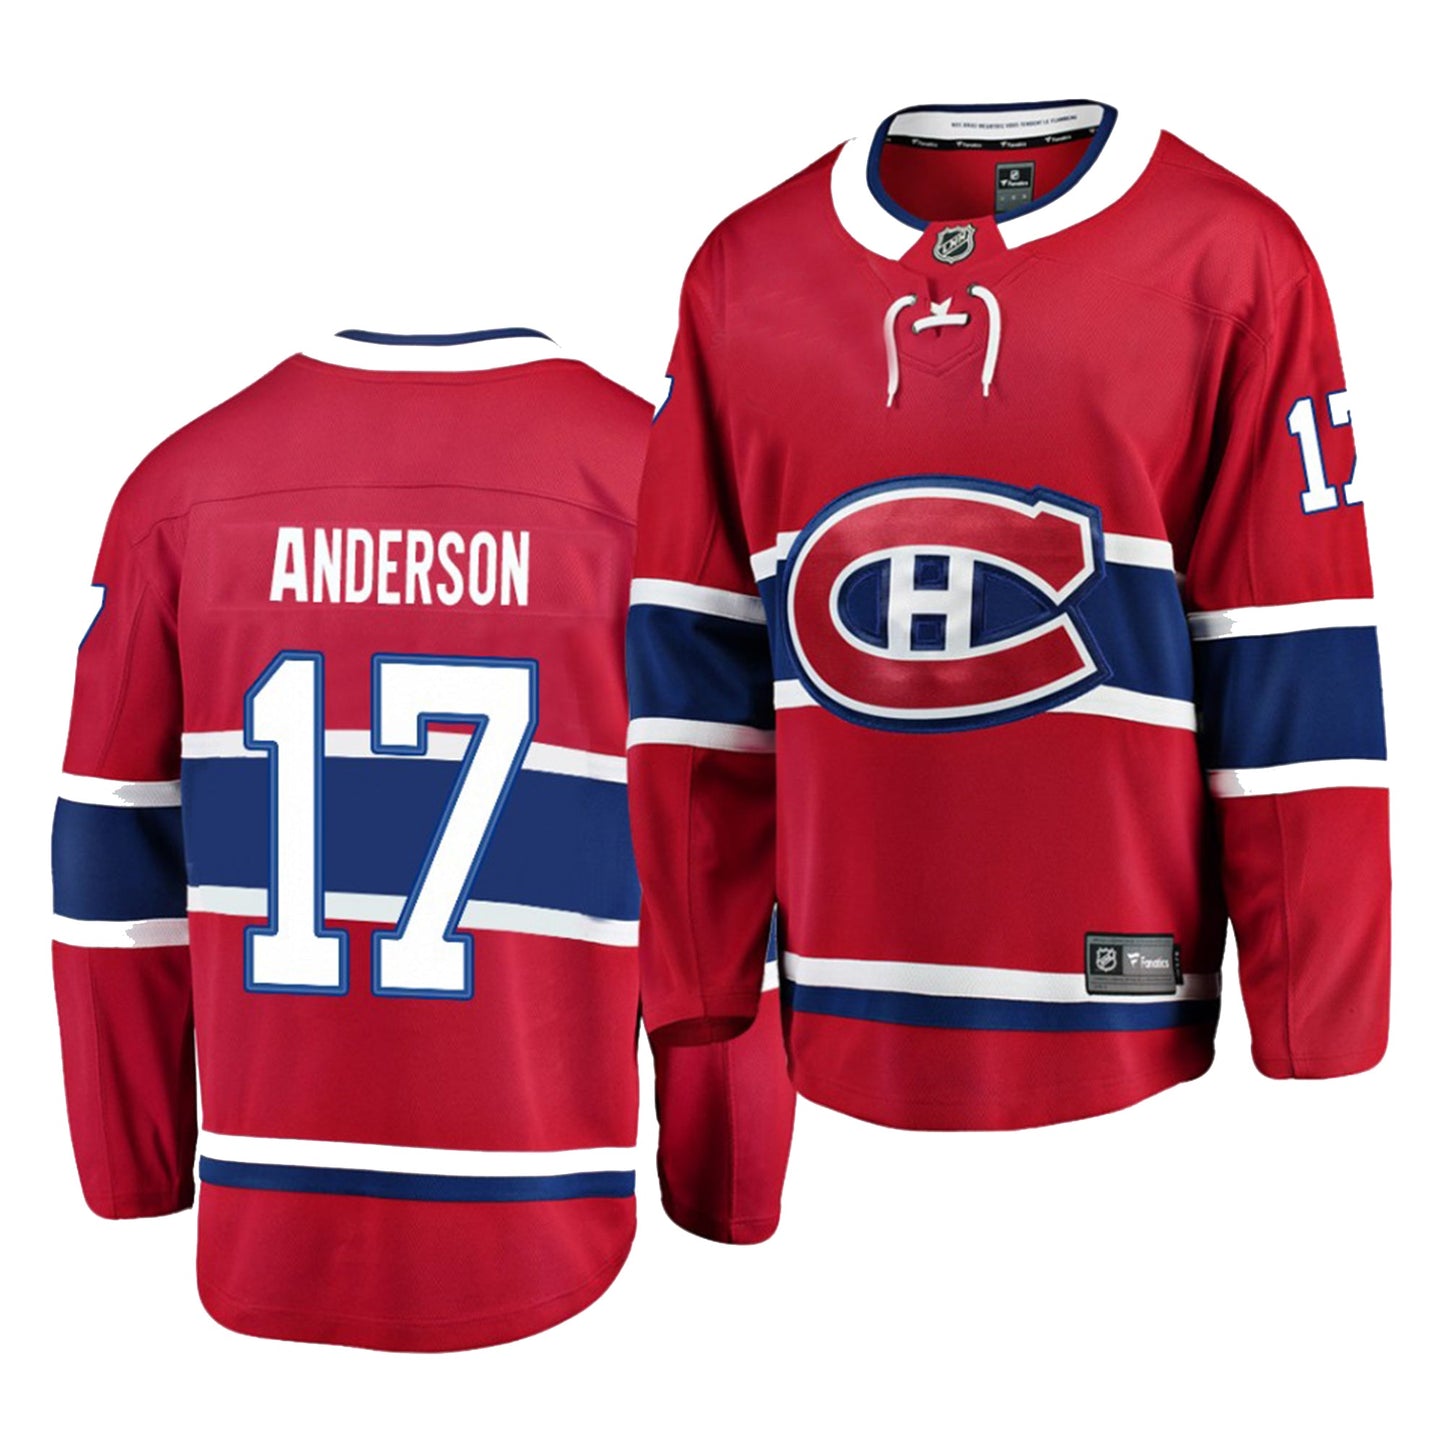 NHL Josh Anderson Montreal Canadiens 17 Jersey